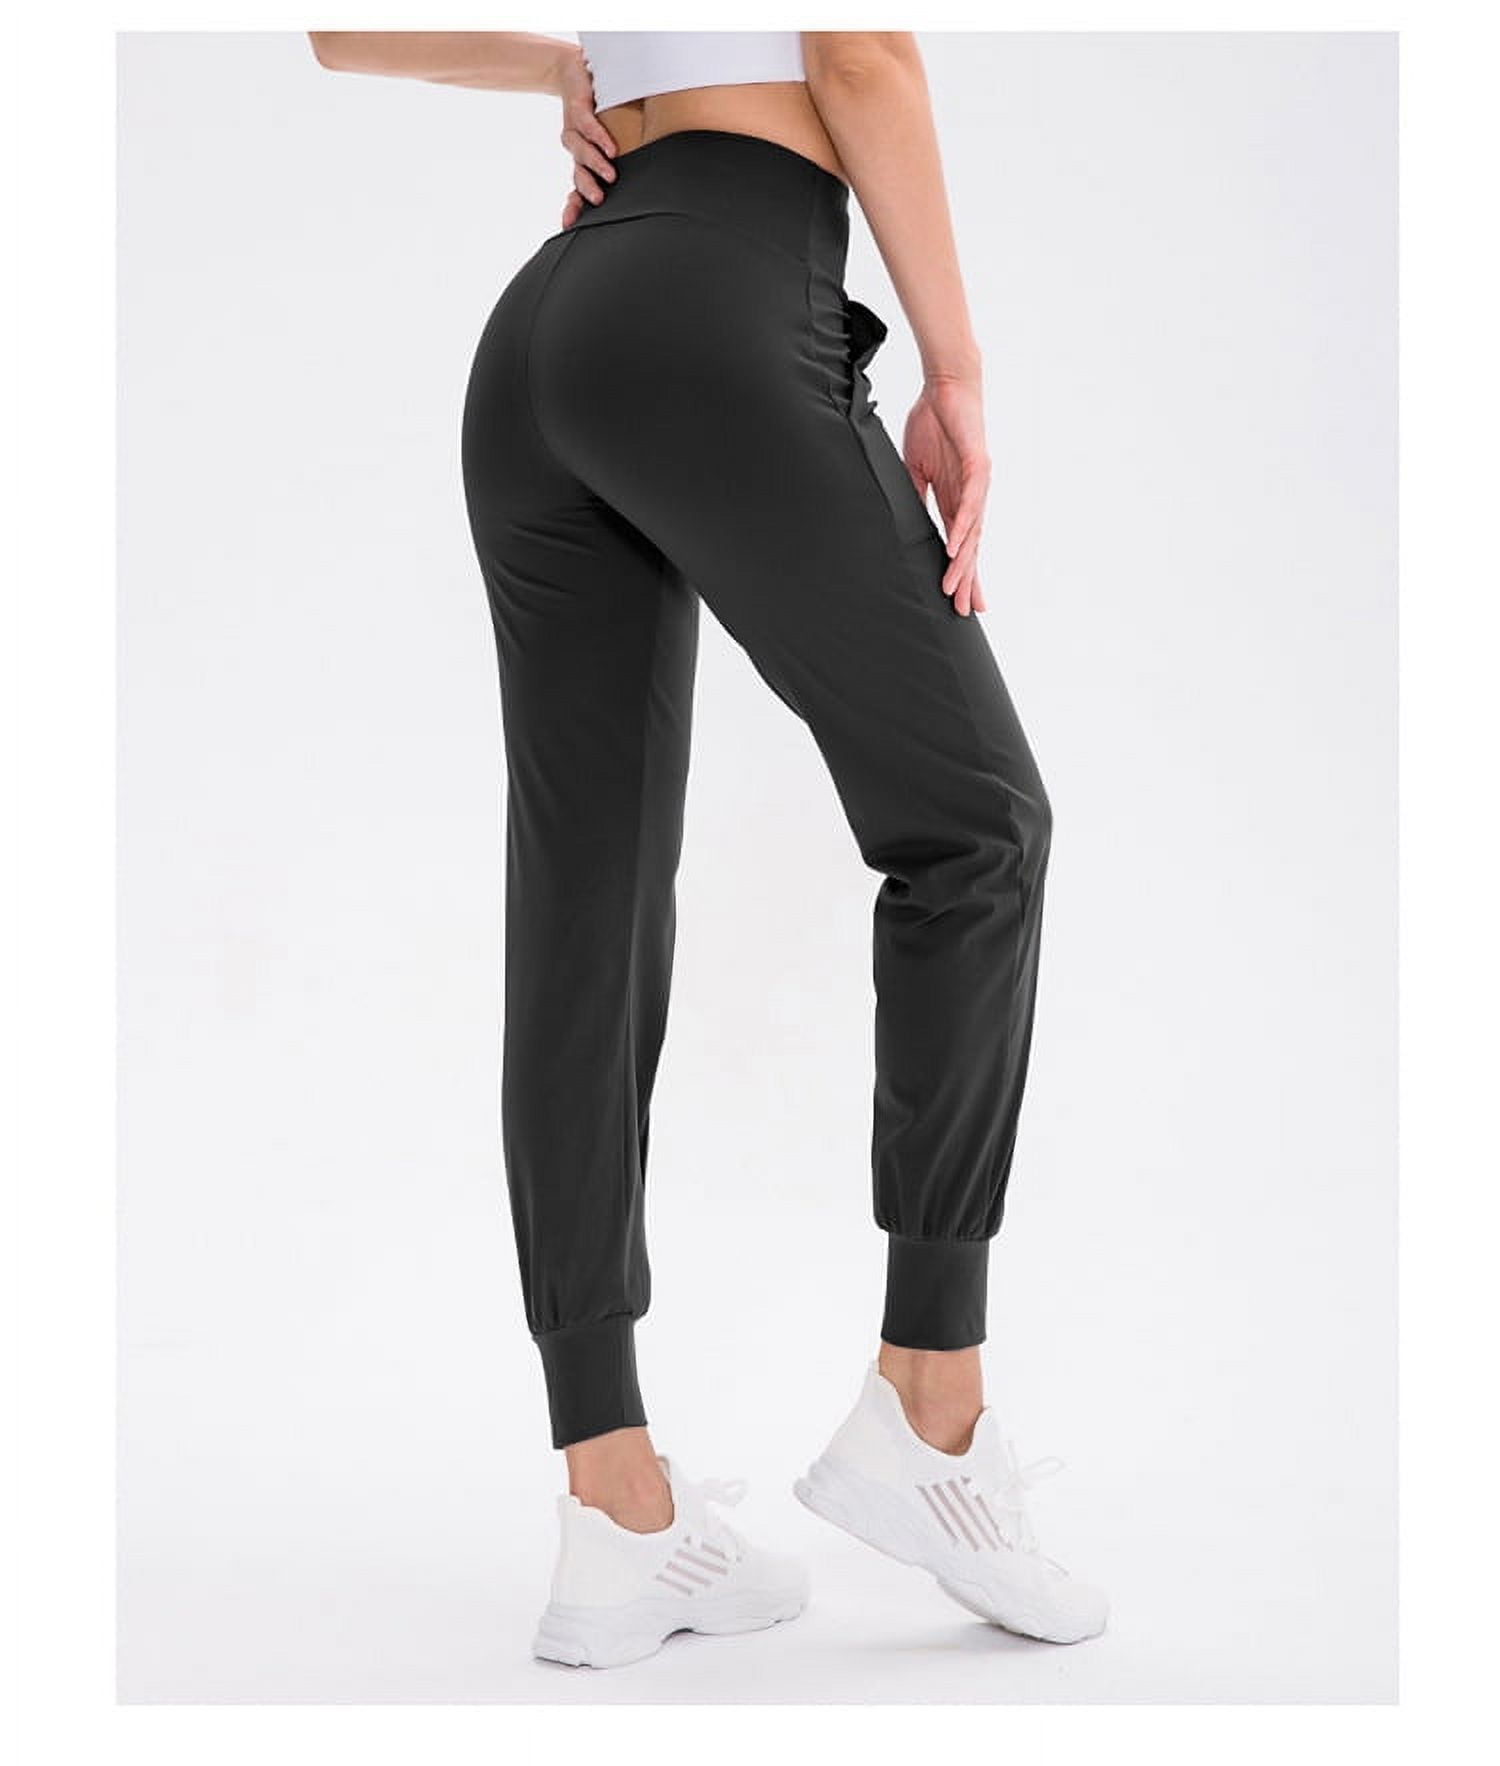 BESTSPR Yoga Pants for Women Lady High Waisted Workout Jogging